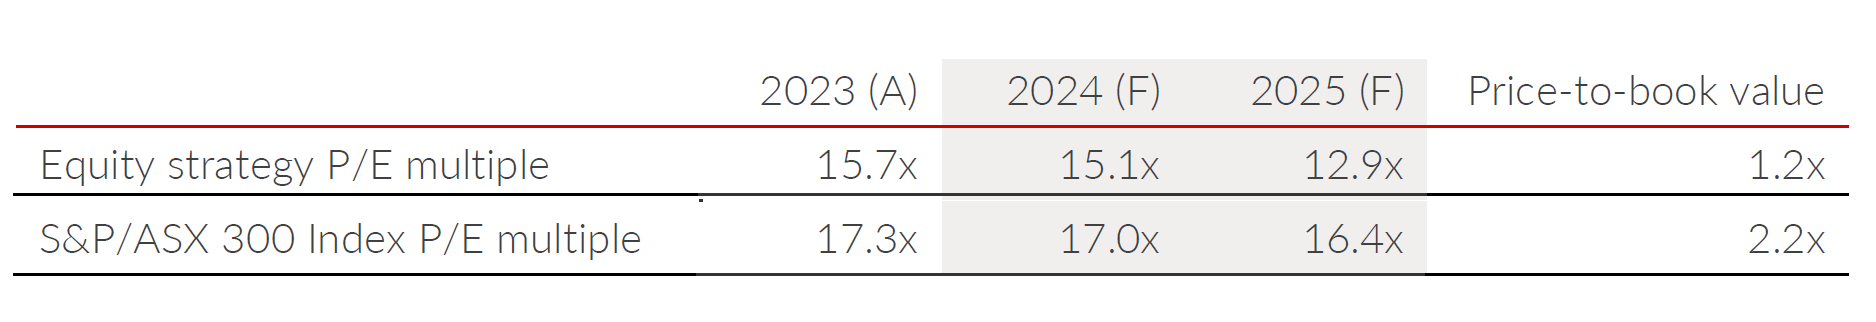 Source: FactSet, Allan Gray, 21 March 2024. (A) = Actual; (F) = Forecast.